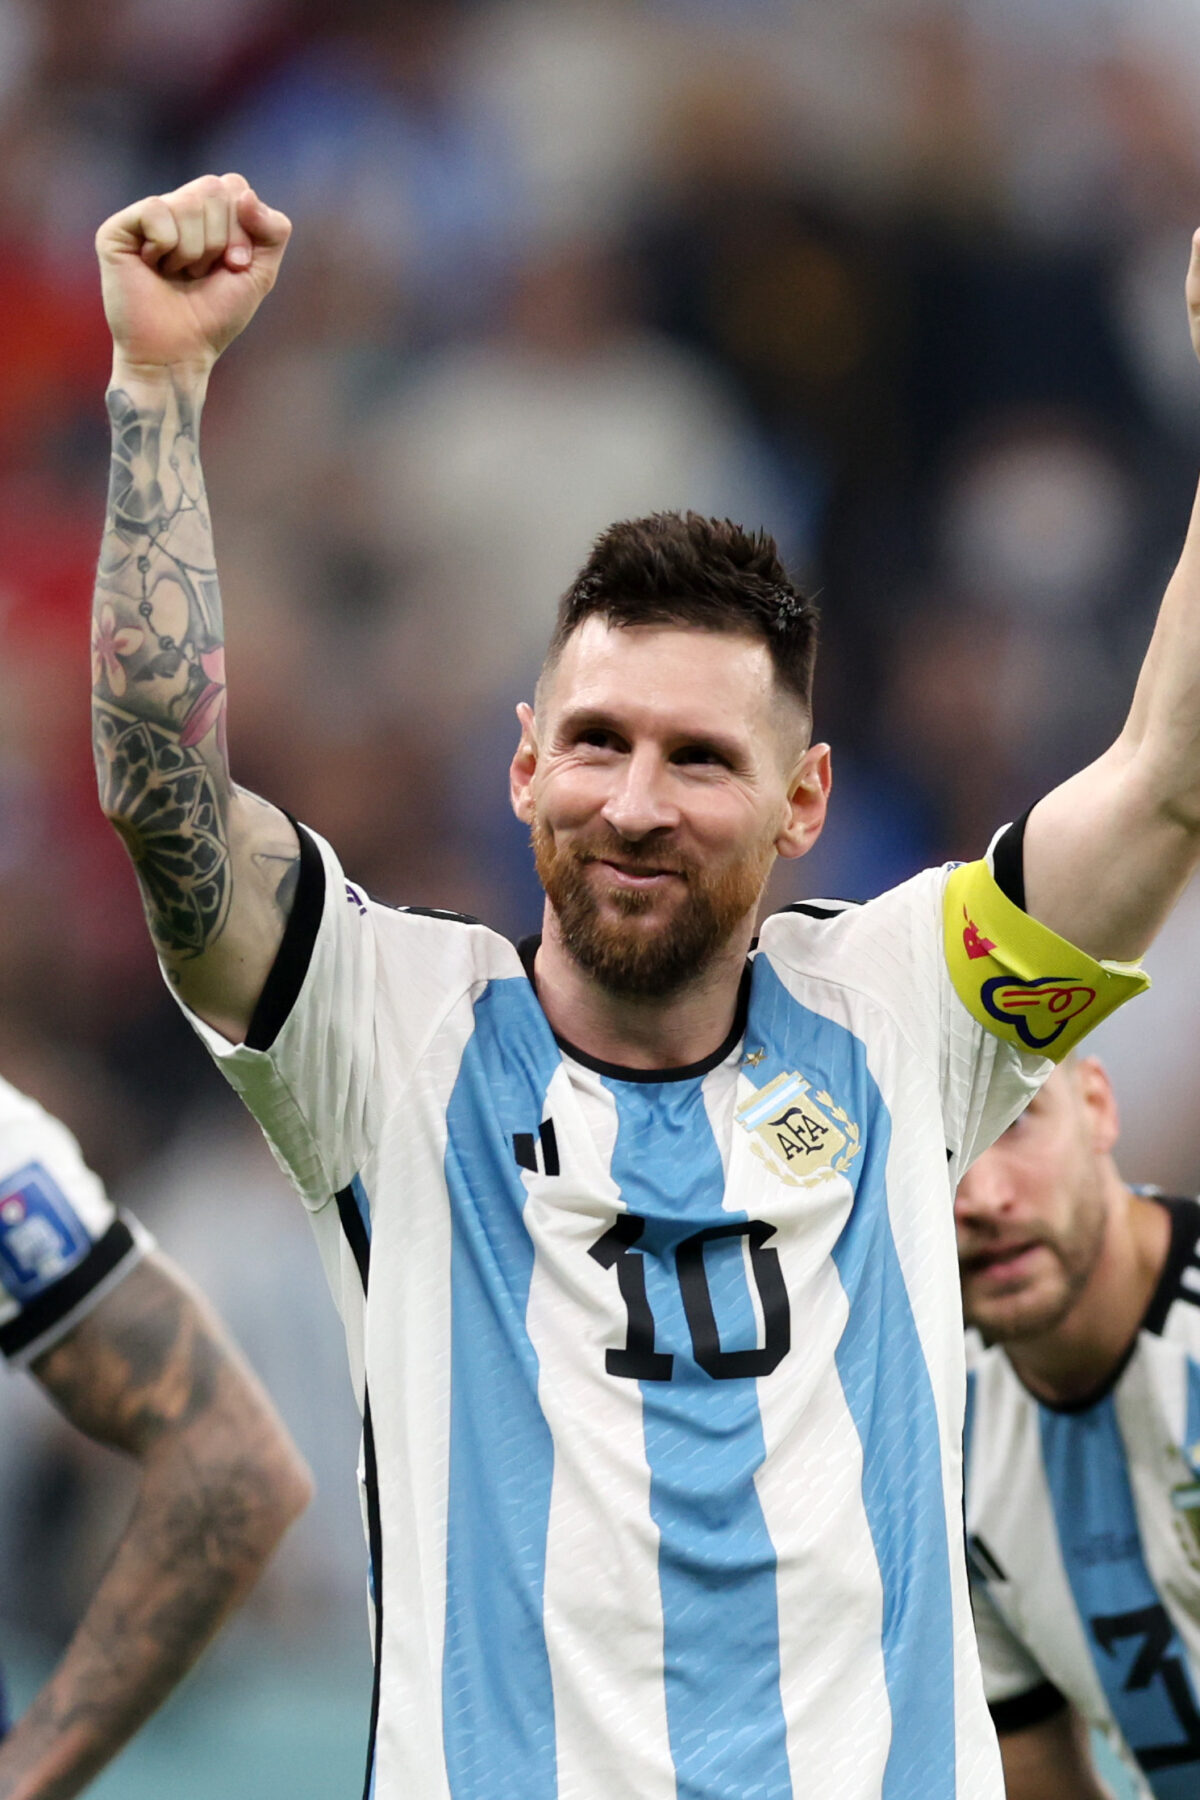 LUSAIL CITY, QATAR - DECEMBER 13: Lionel Messi of Argentina celebrates after the 3-0 win during the FIFA World Cup Qatar 2022 semi final match between Argentina and Croatia at Lusail Stadium on December 13, 2022 in Lusail City, Qatar. (Photo by Clive Brunskill/Getty Images)